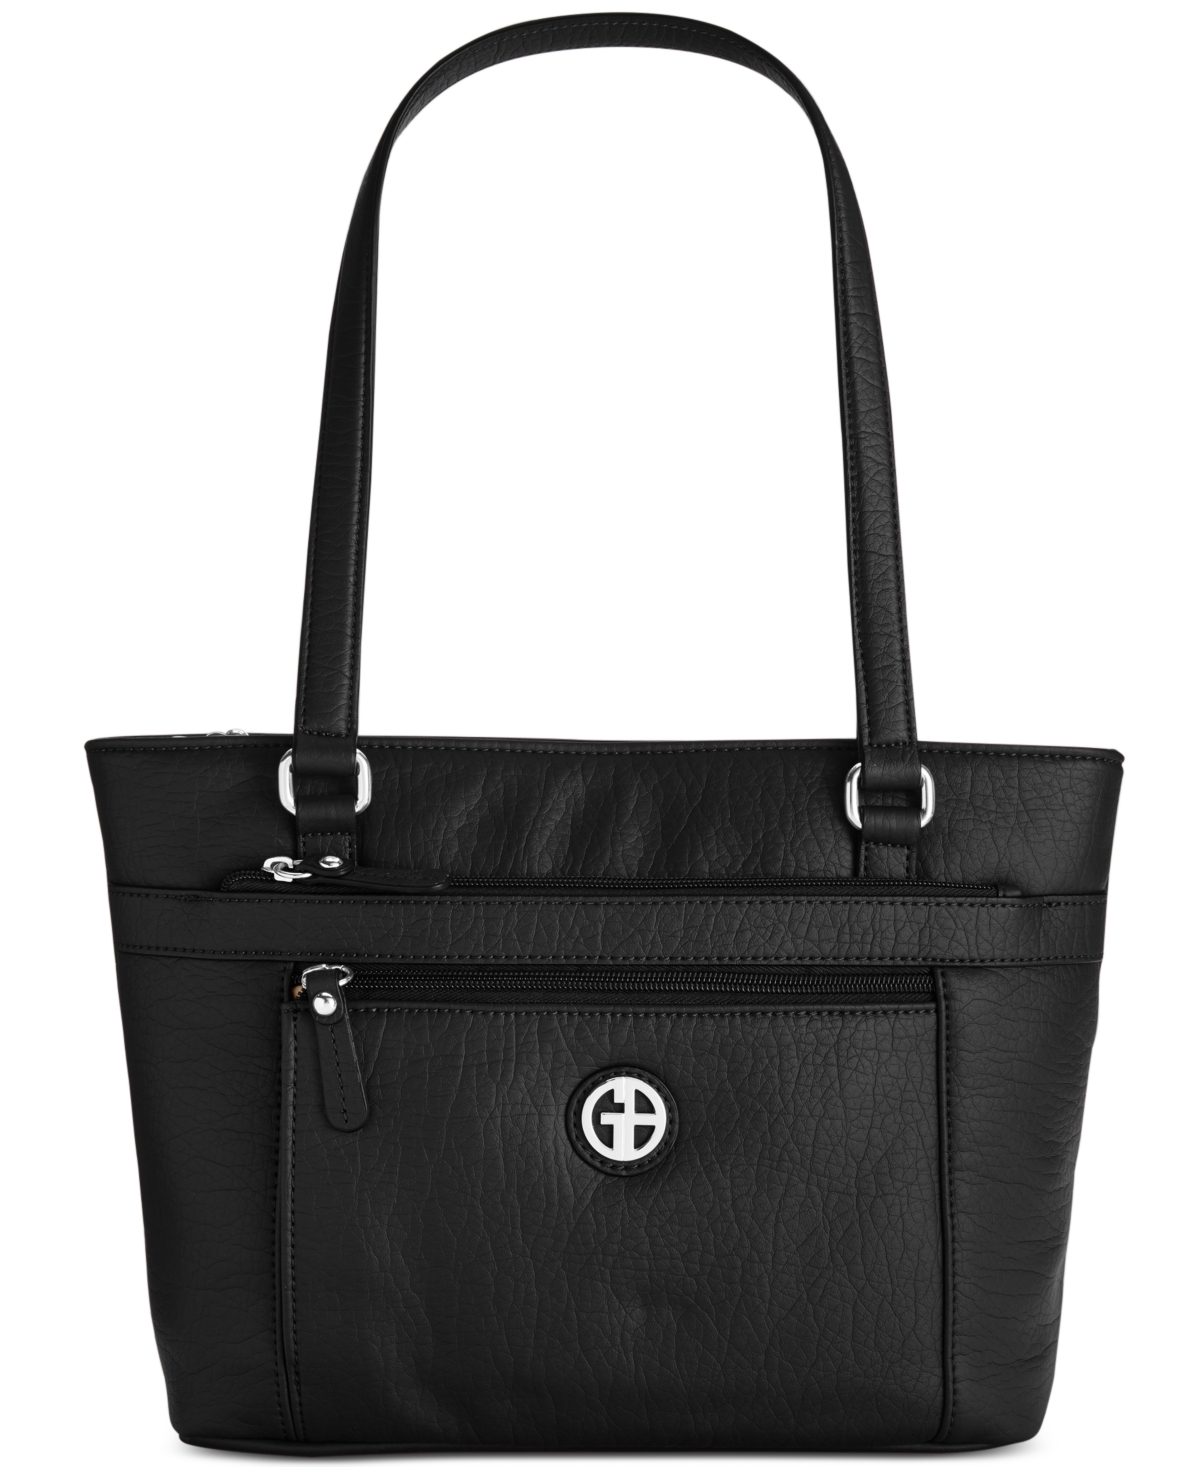 Pebble Tote, Created for Macy's - Black/Black/Silver